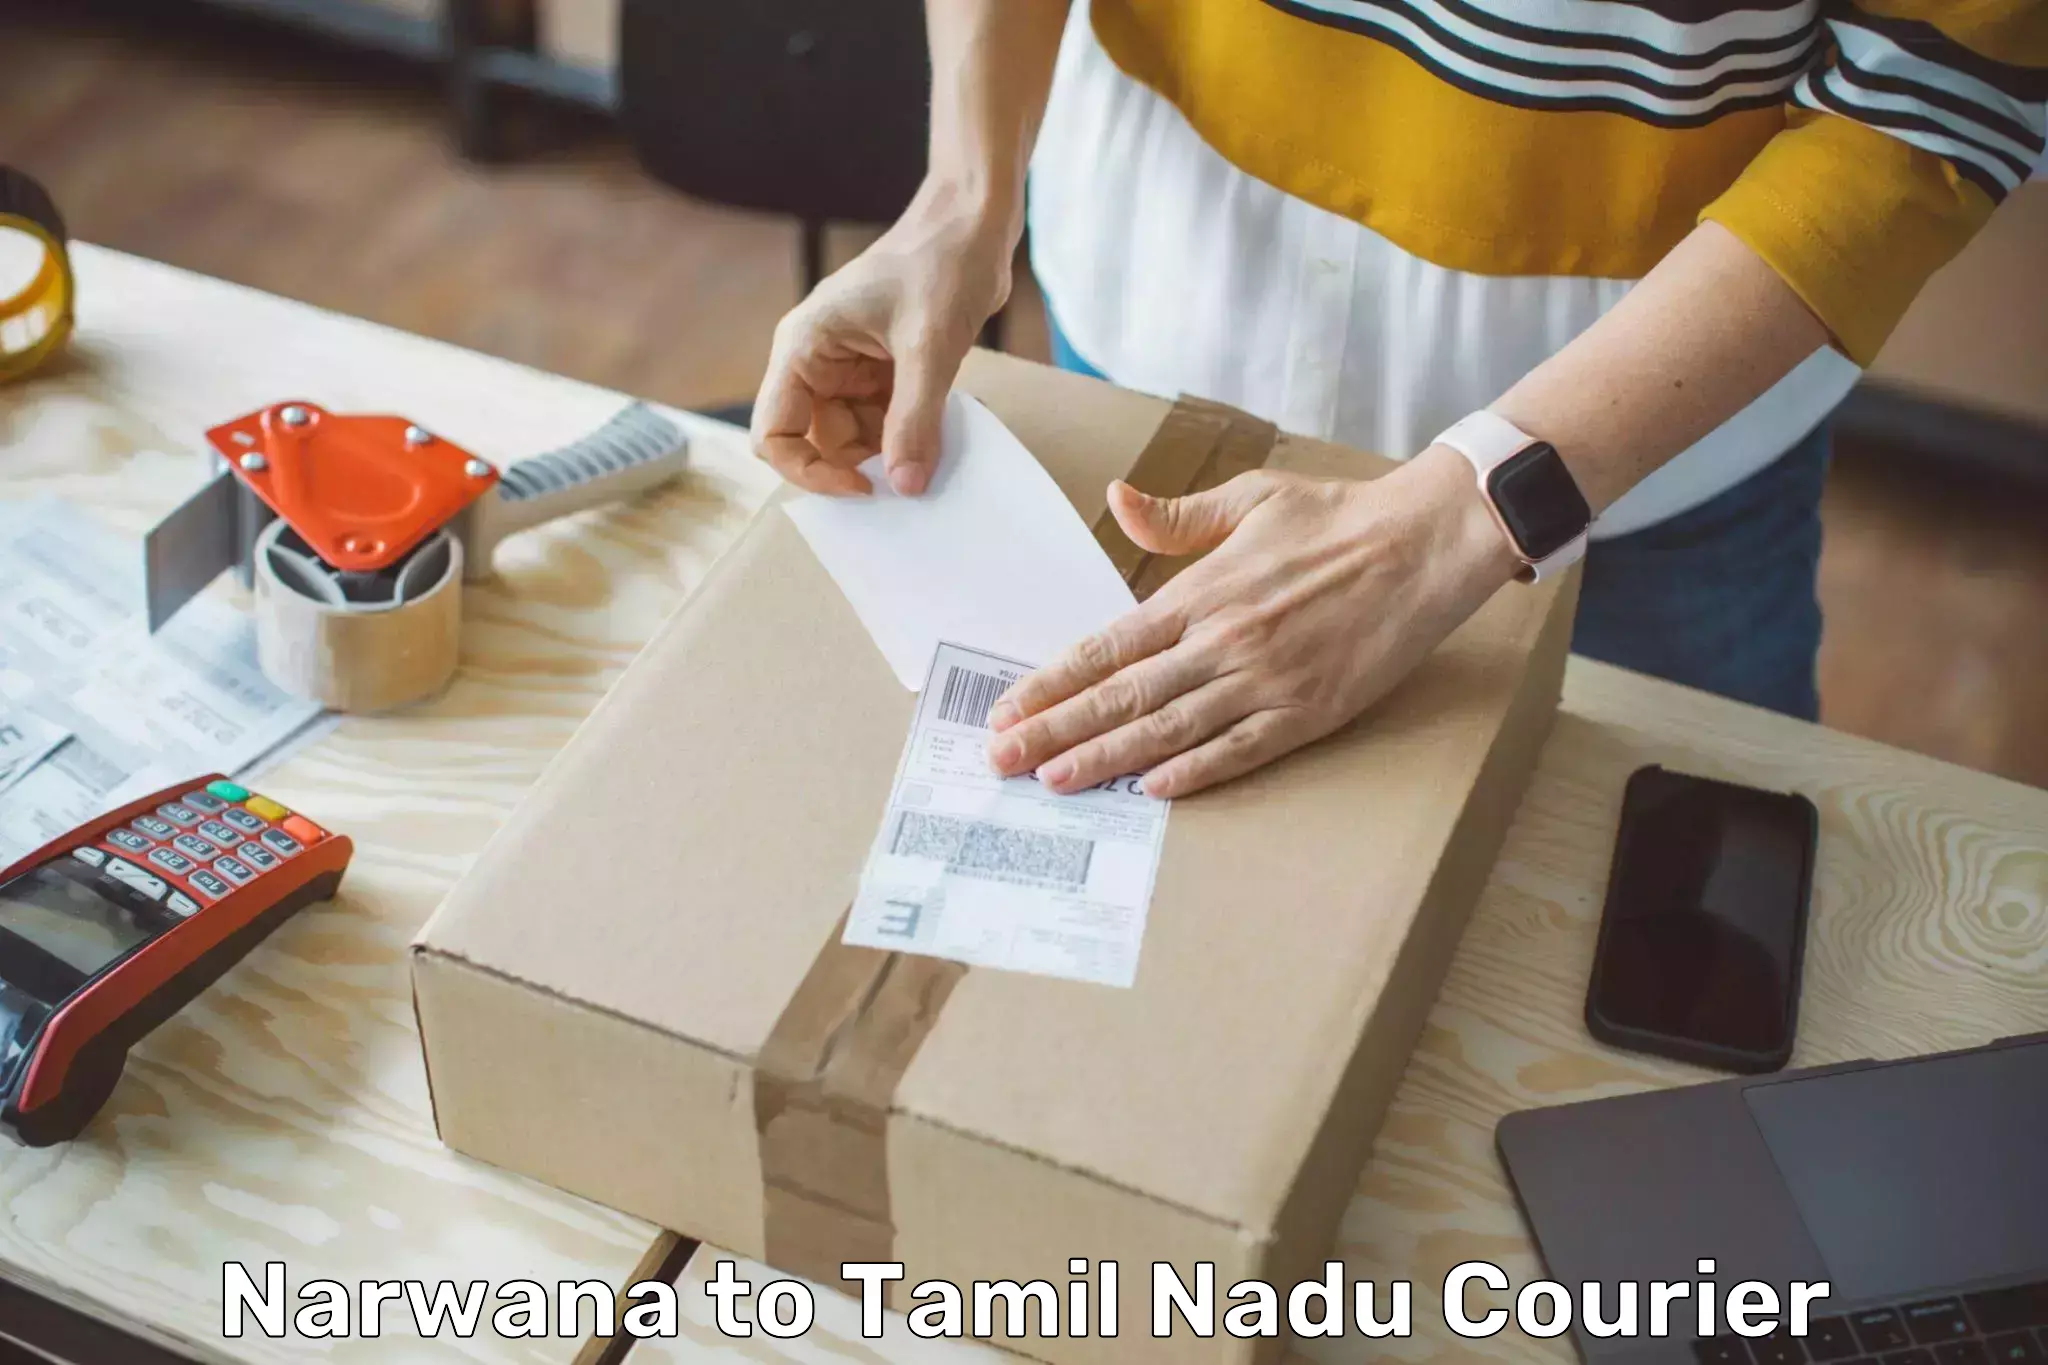 Personalized courier experiences Narwana to Thisayanvilai